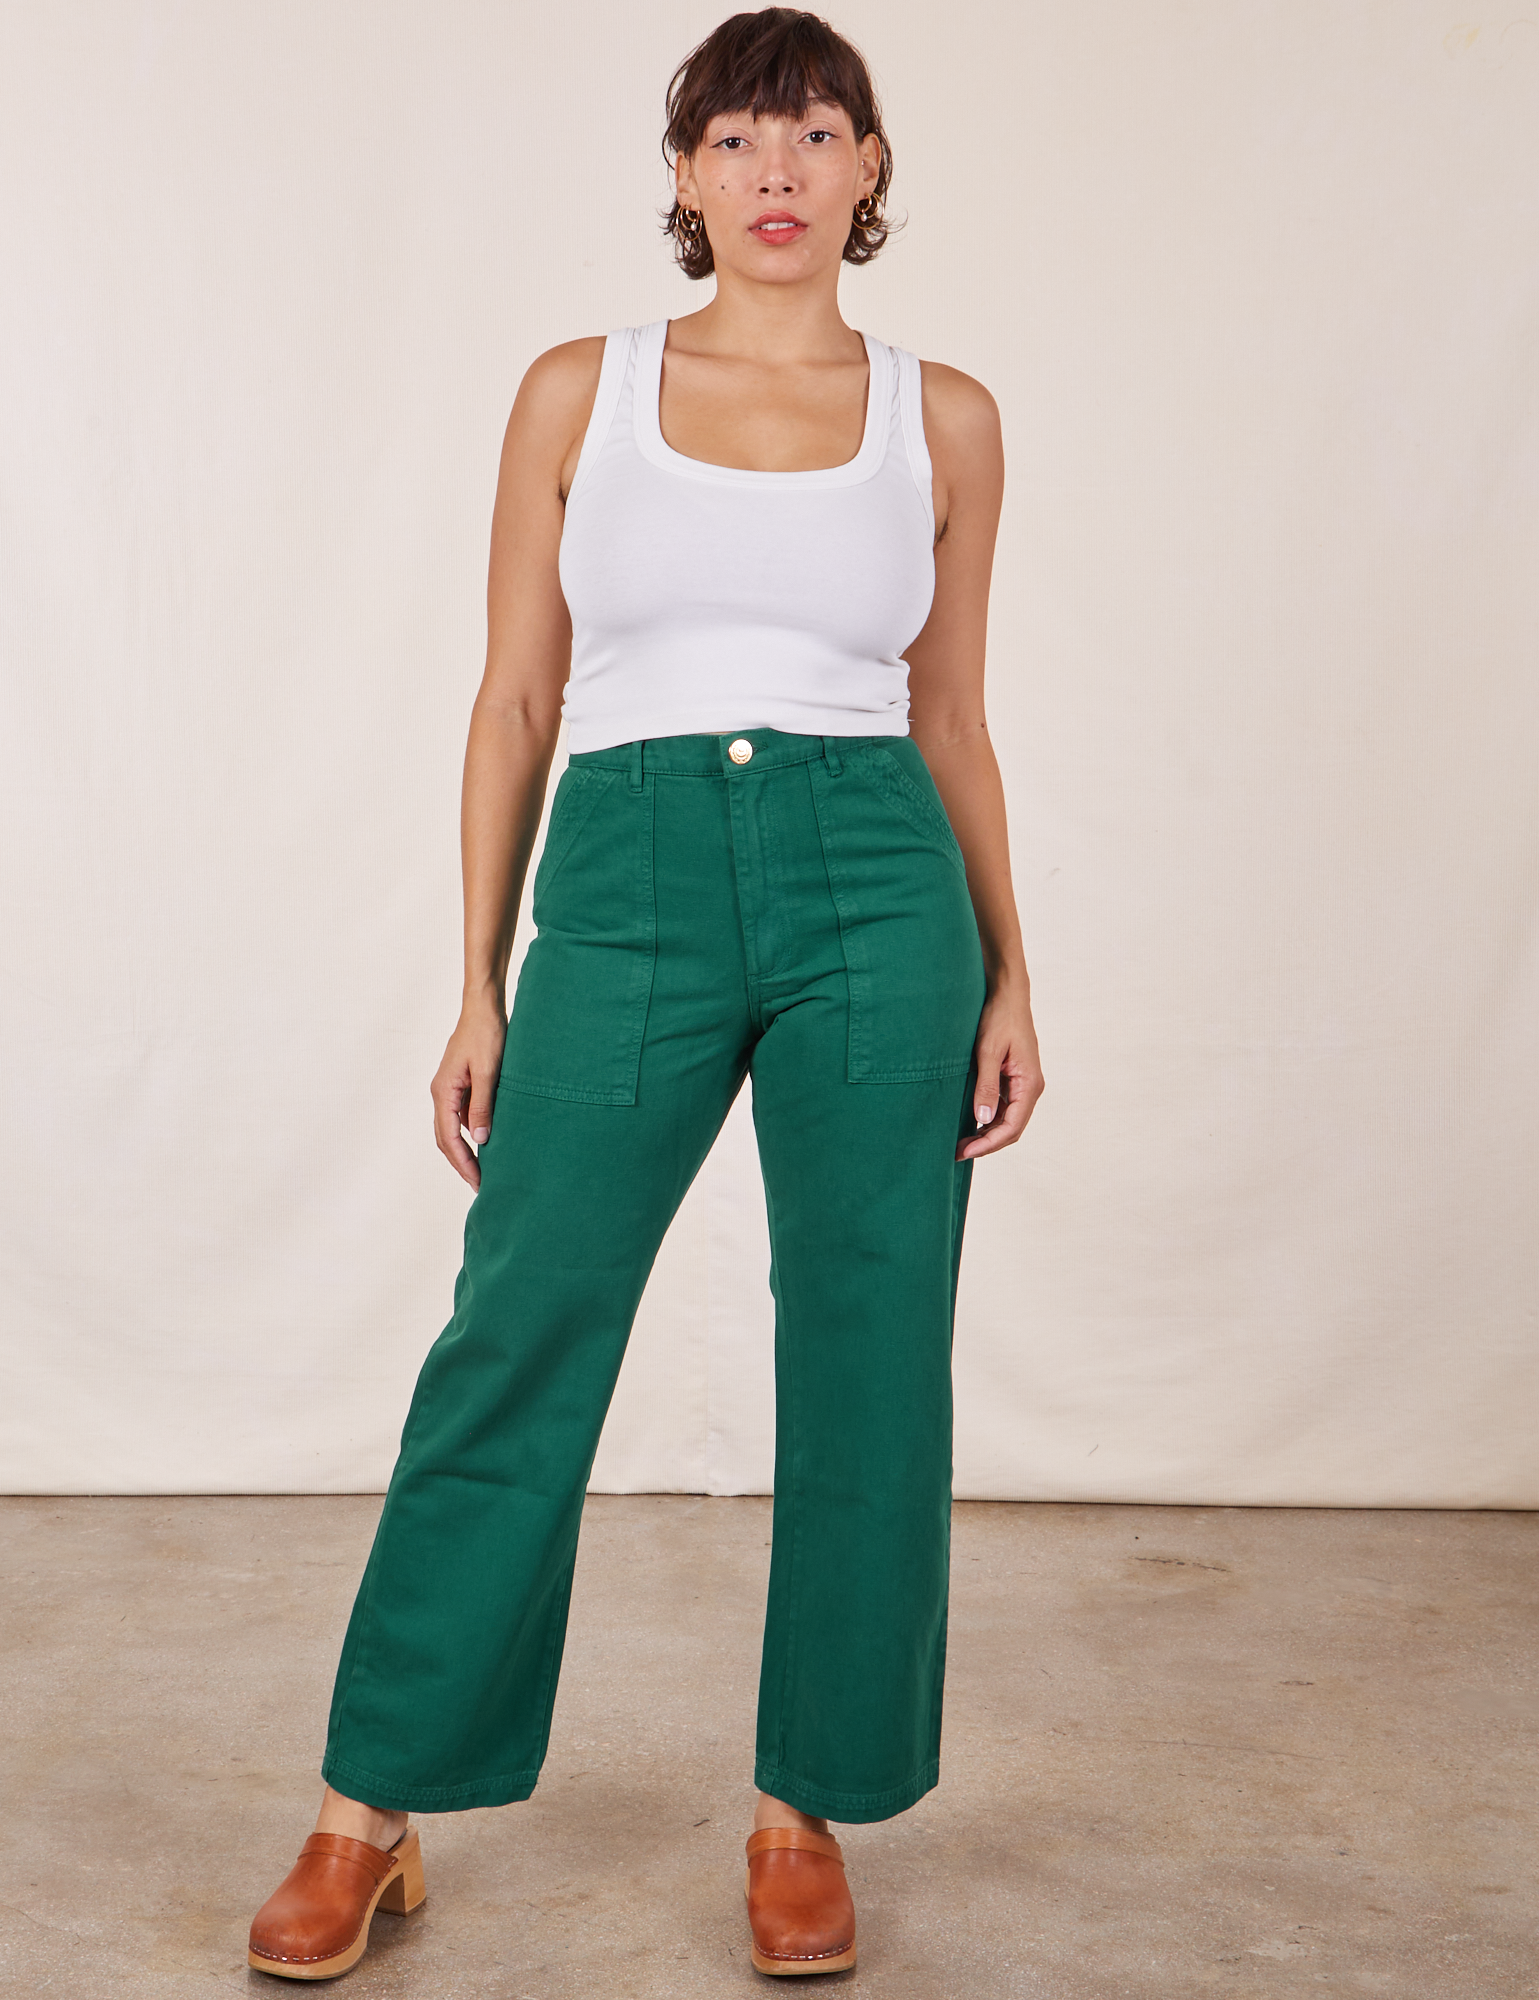 Tiara is wearing Work Pants in Hunter Green and vintage off-white Cropped Tank Top